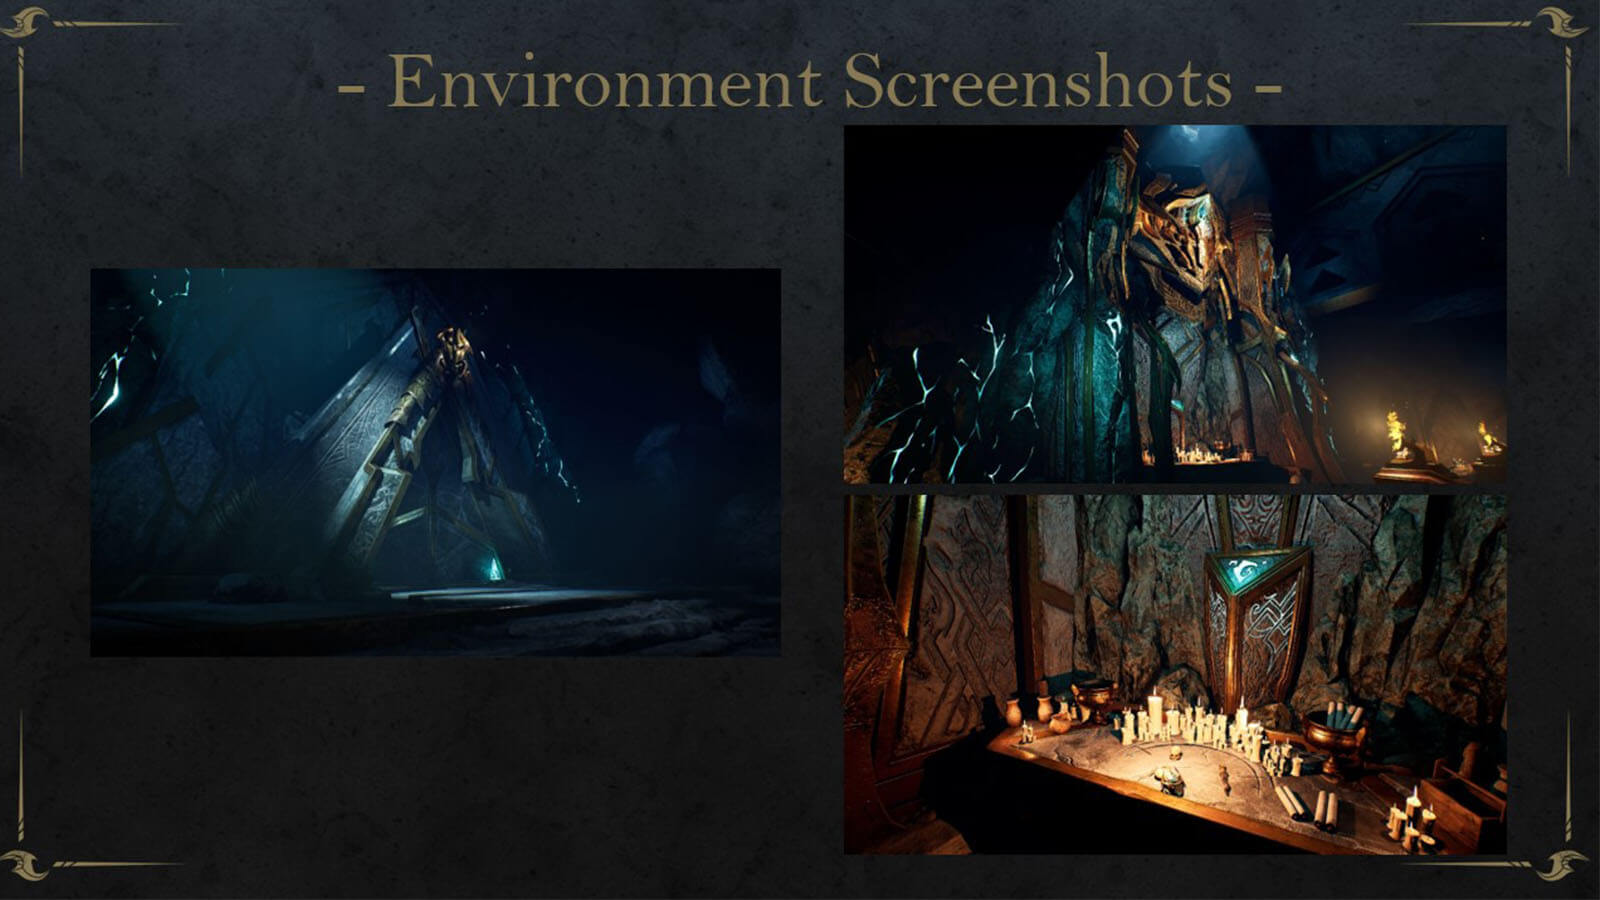 Still image depicting three separate environment screenshots of a 3D dungeon